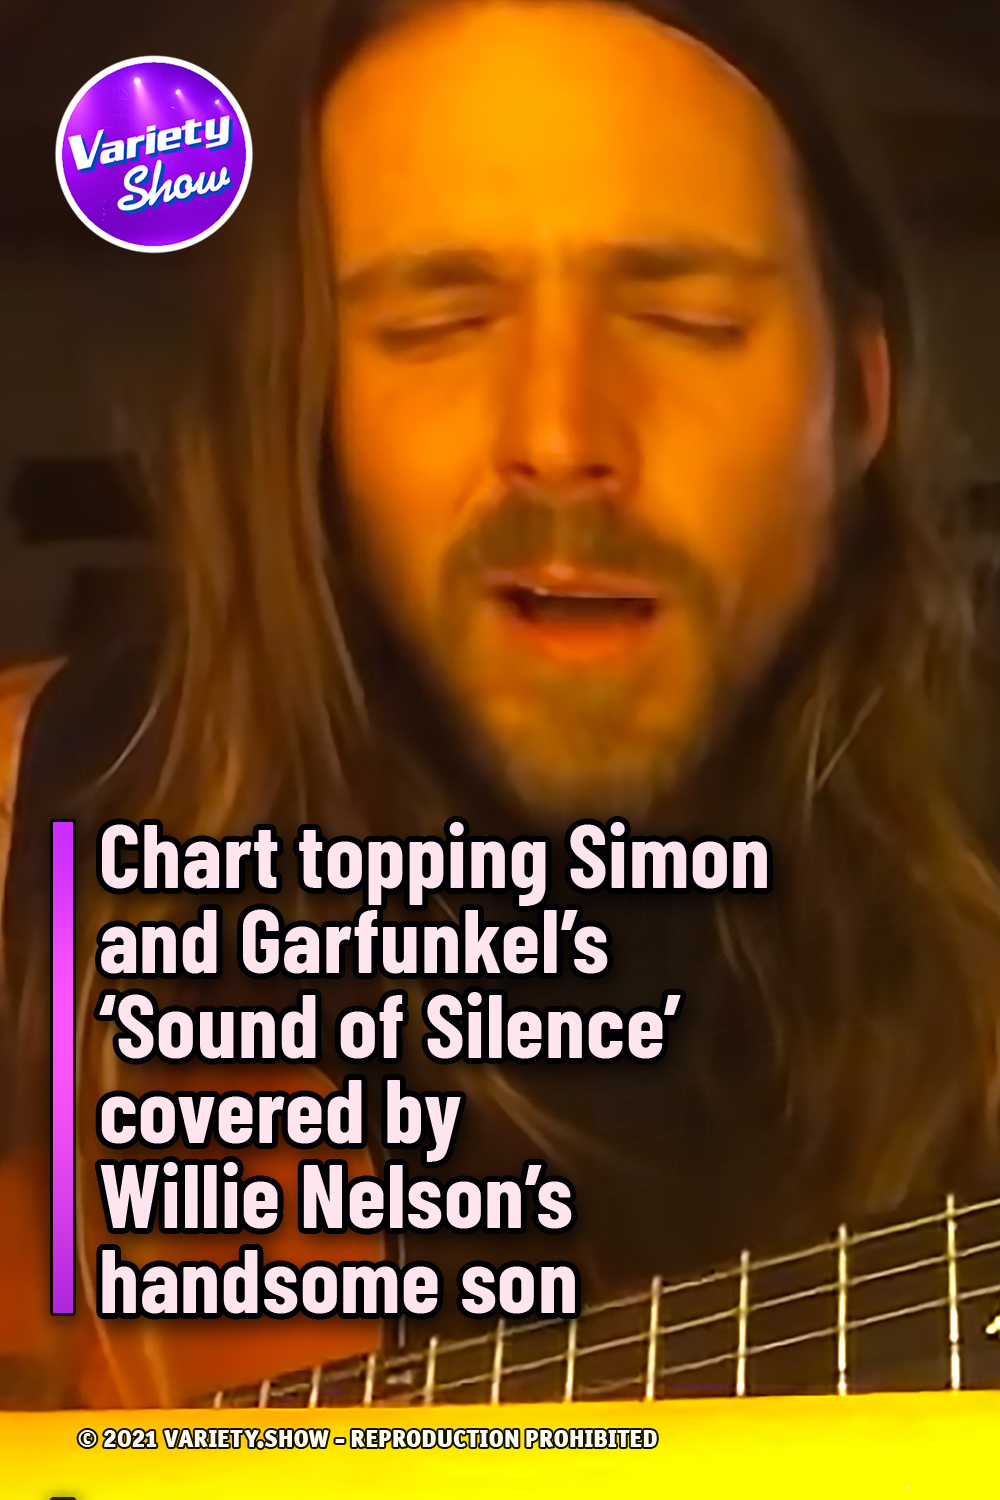 Chart topping Simon and Garfunkel’s ‘Sound of Silence’ covered by Willie Nelson’s handsome son